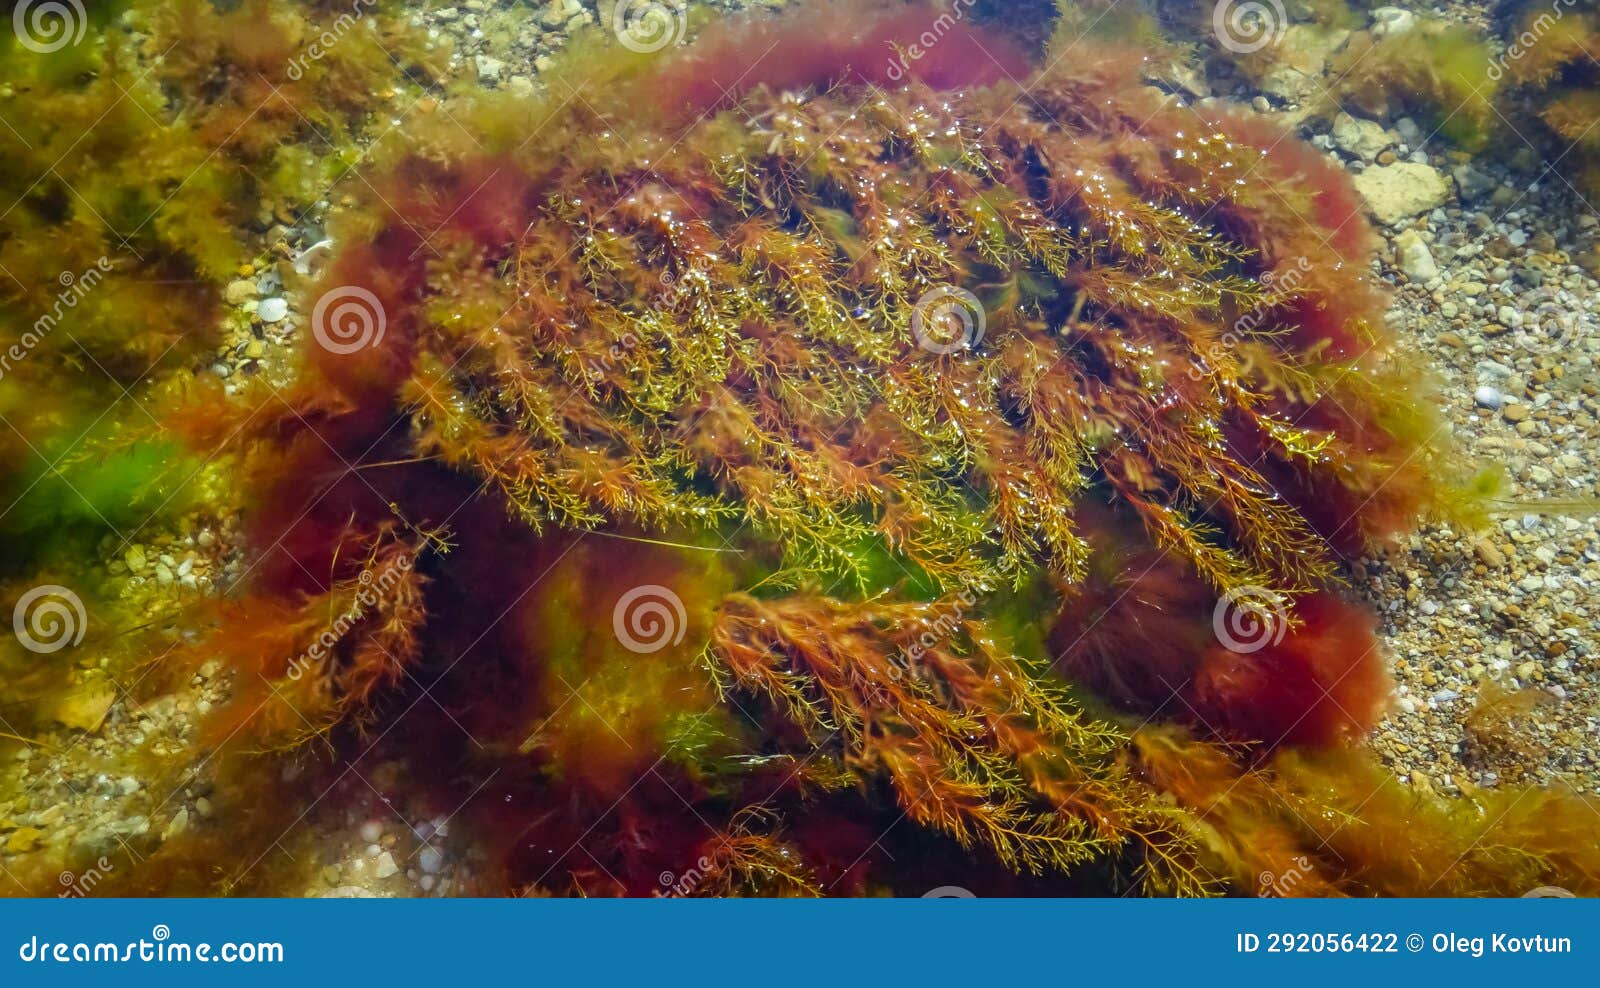 brown algae macrophytes cystoseira barbata and other green and red algae at the bottom of the tiligul estuary